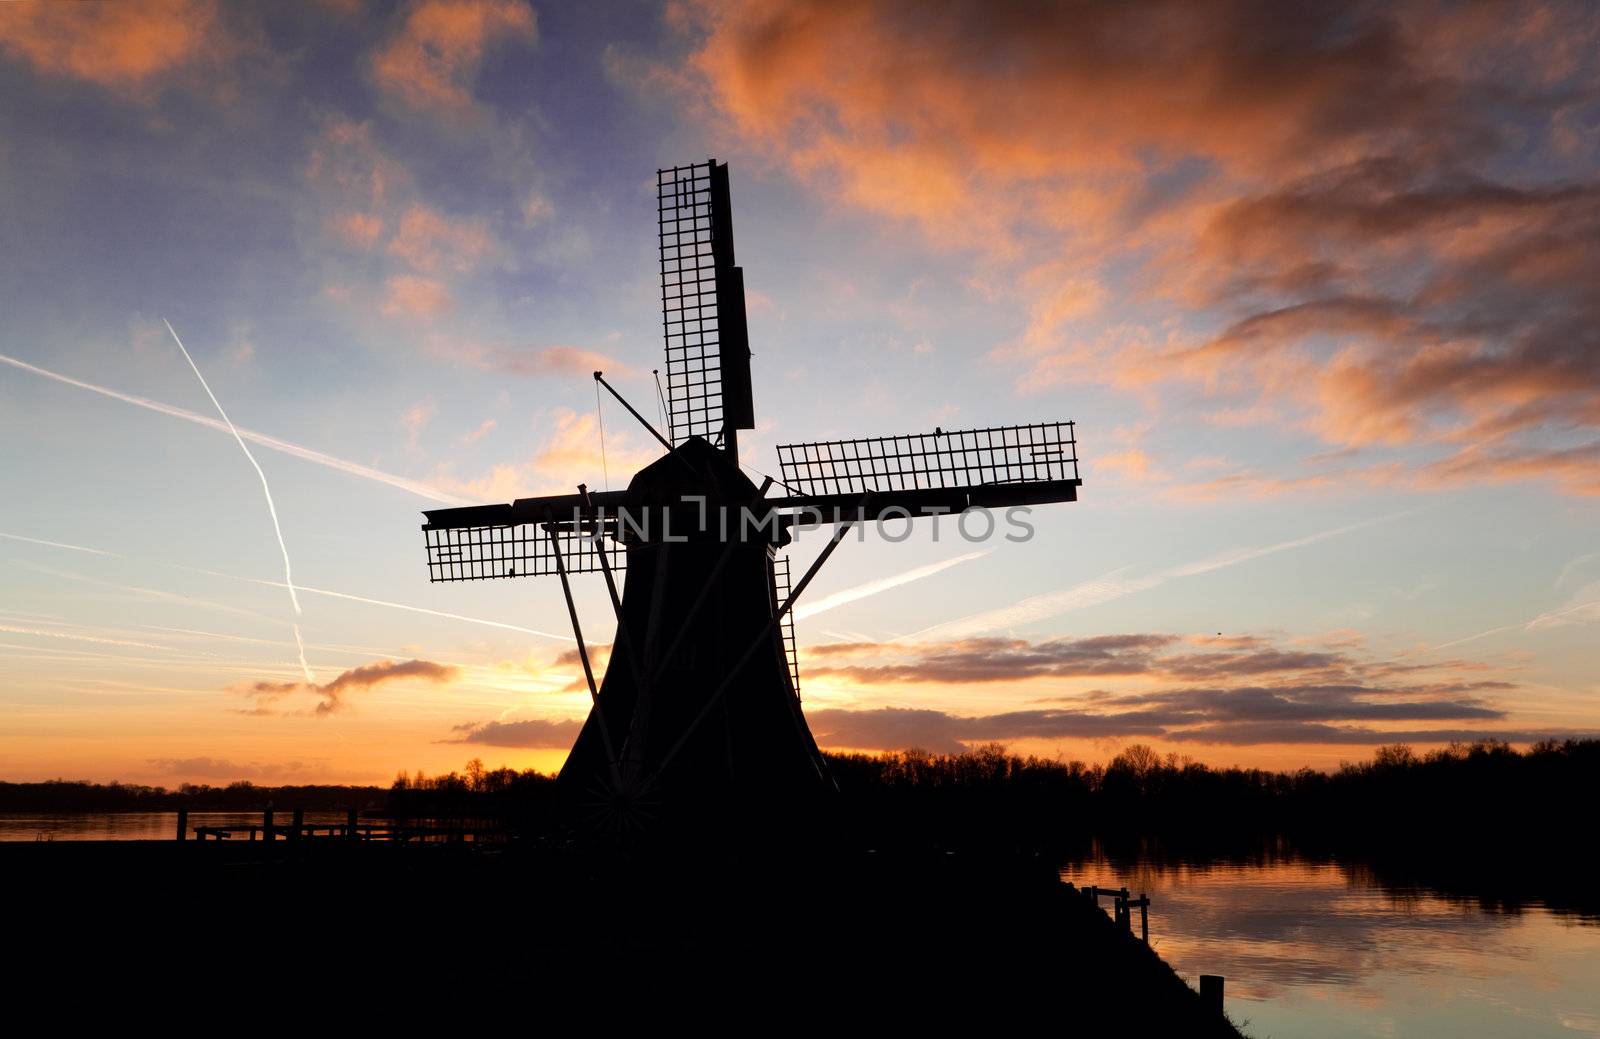 windmill silhouette at sunset by catolla